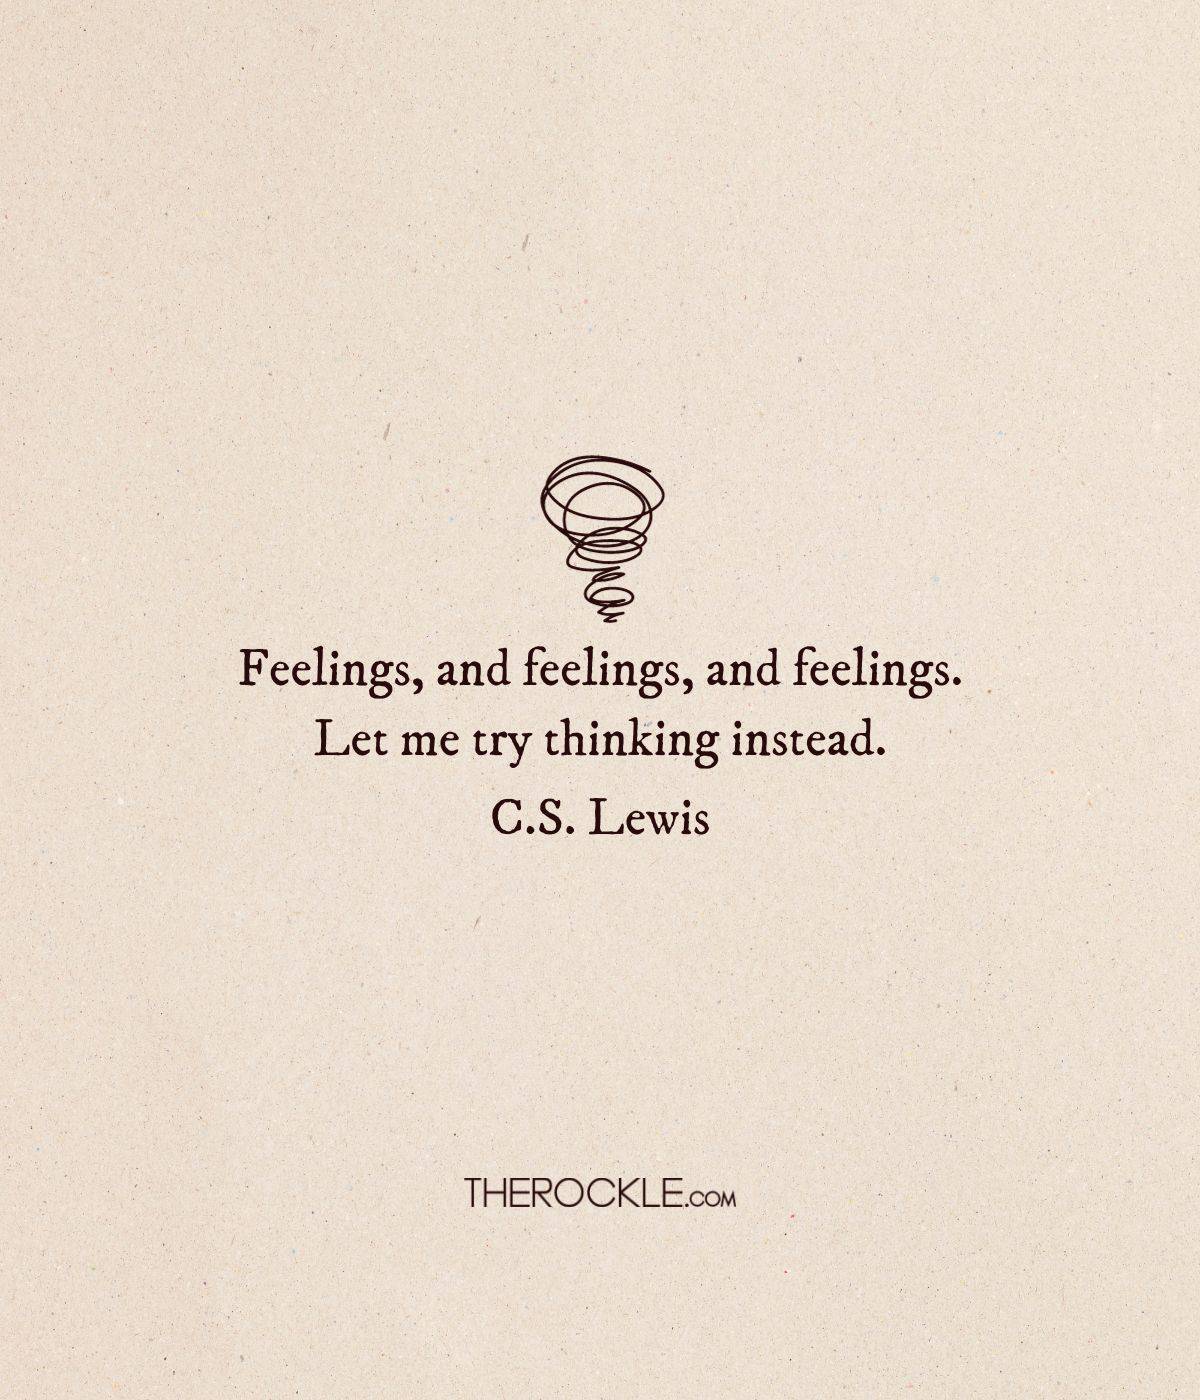 C.S. Lewis quote about thinking and feeling